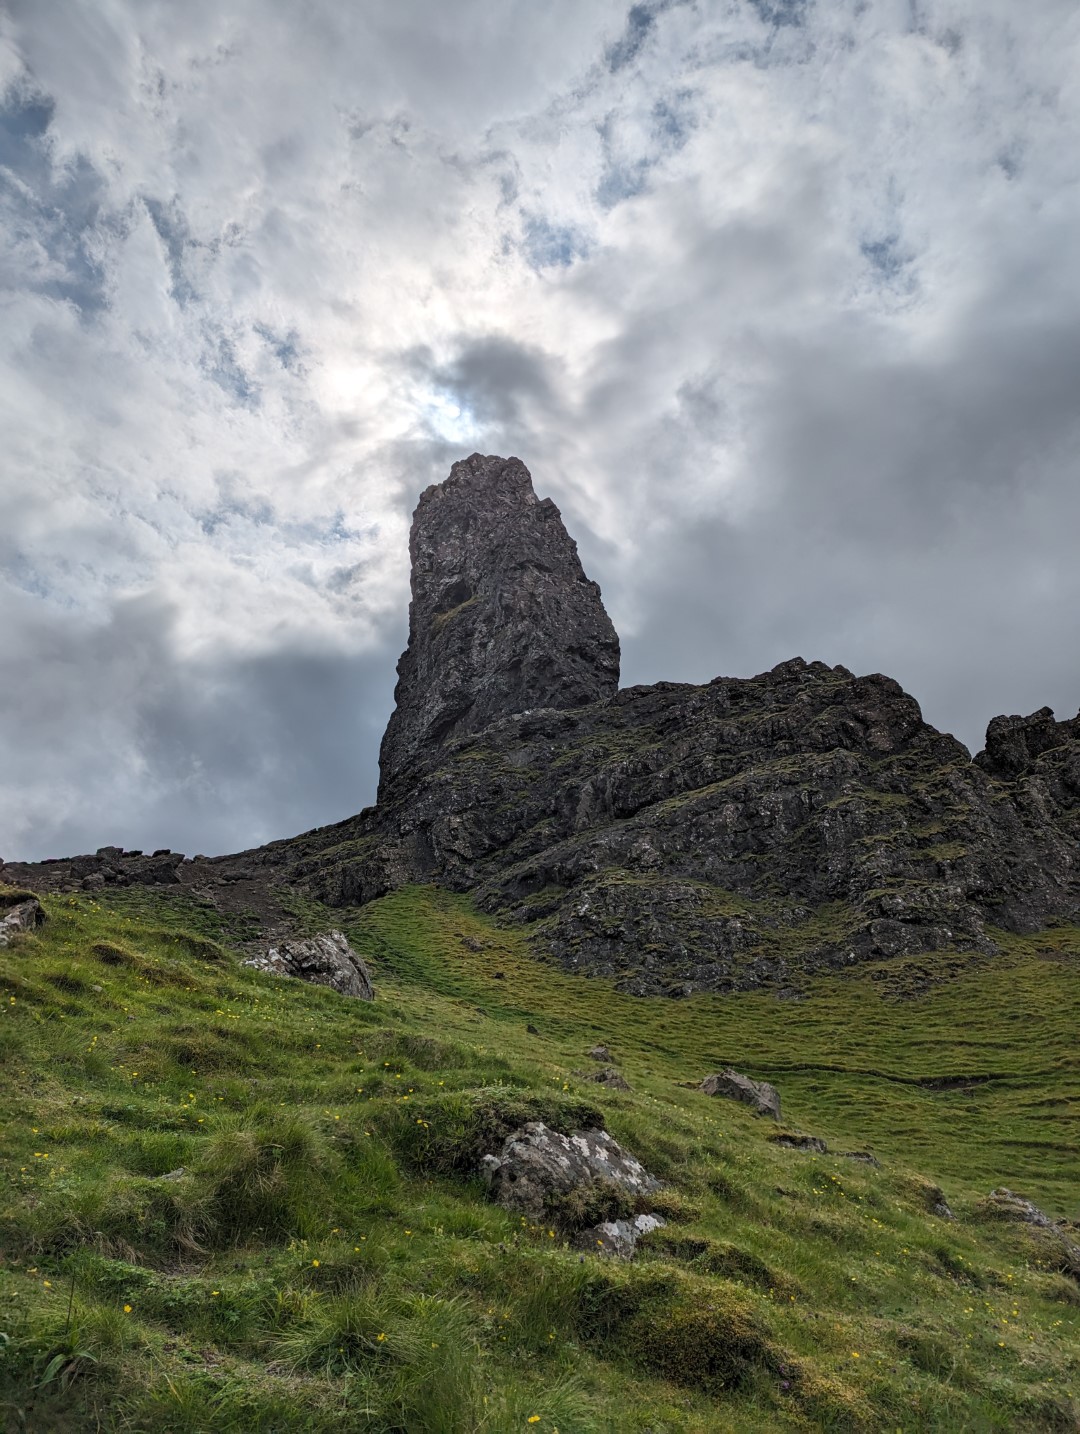 The Old Man of Storr with bright clouds behind